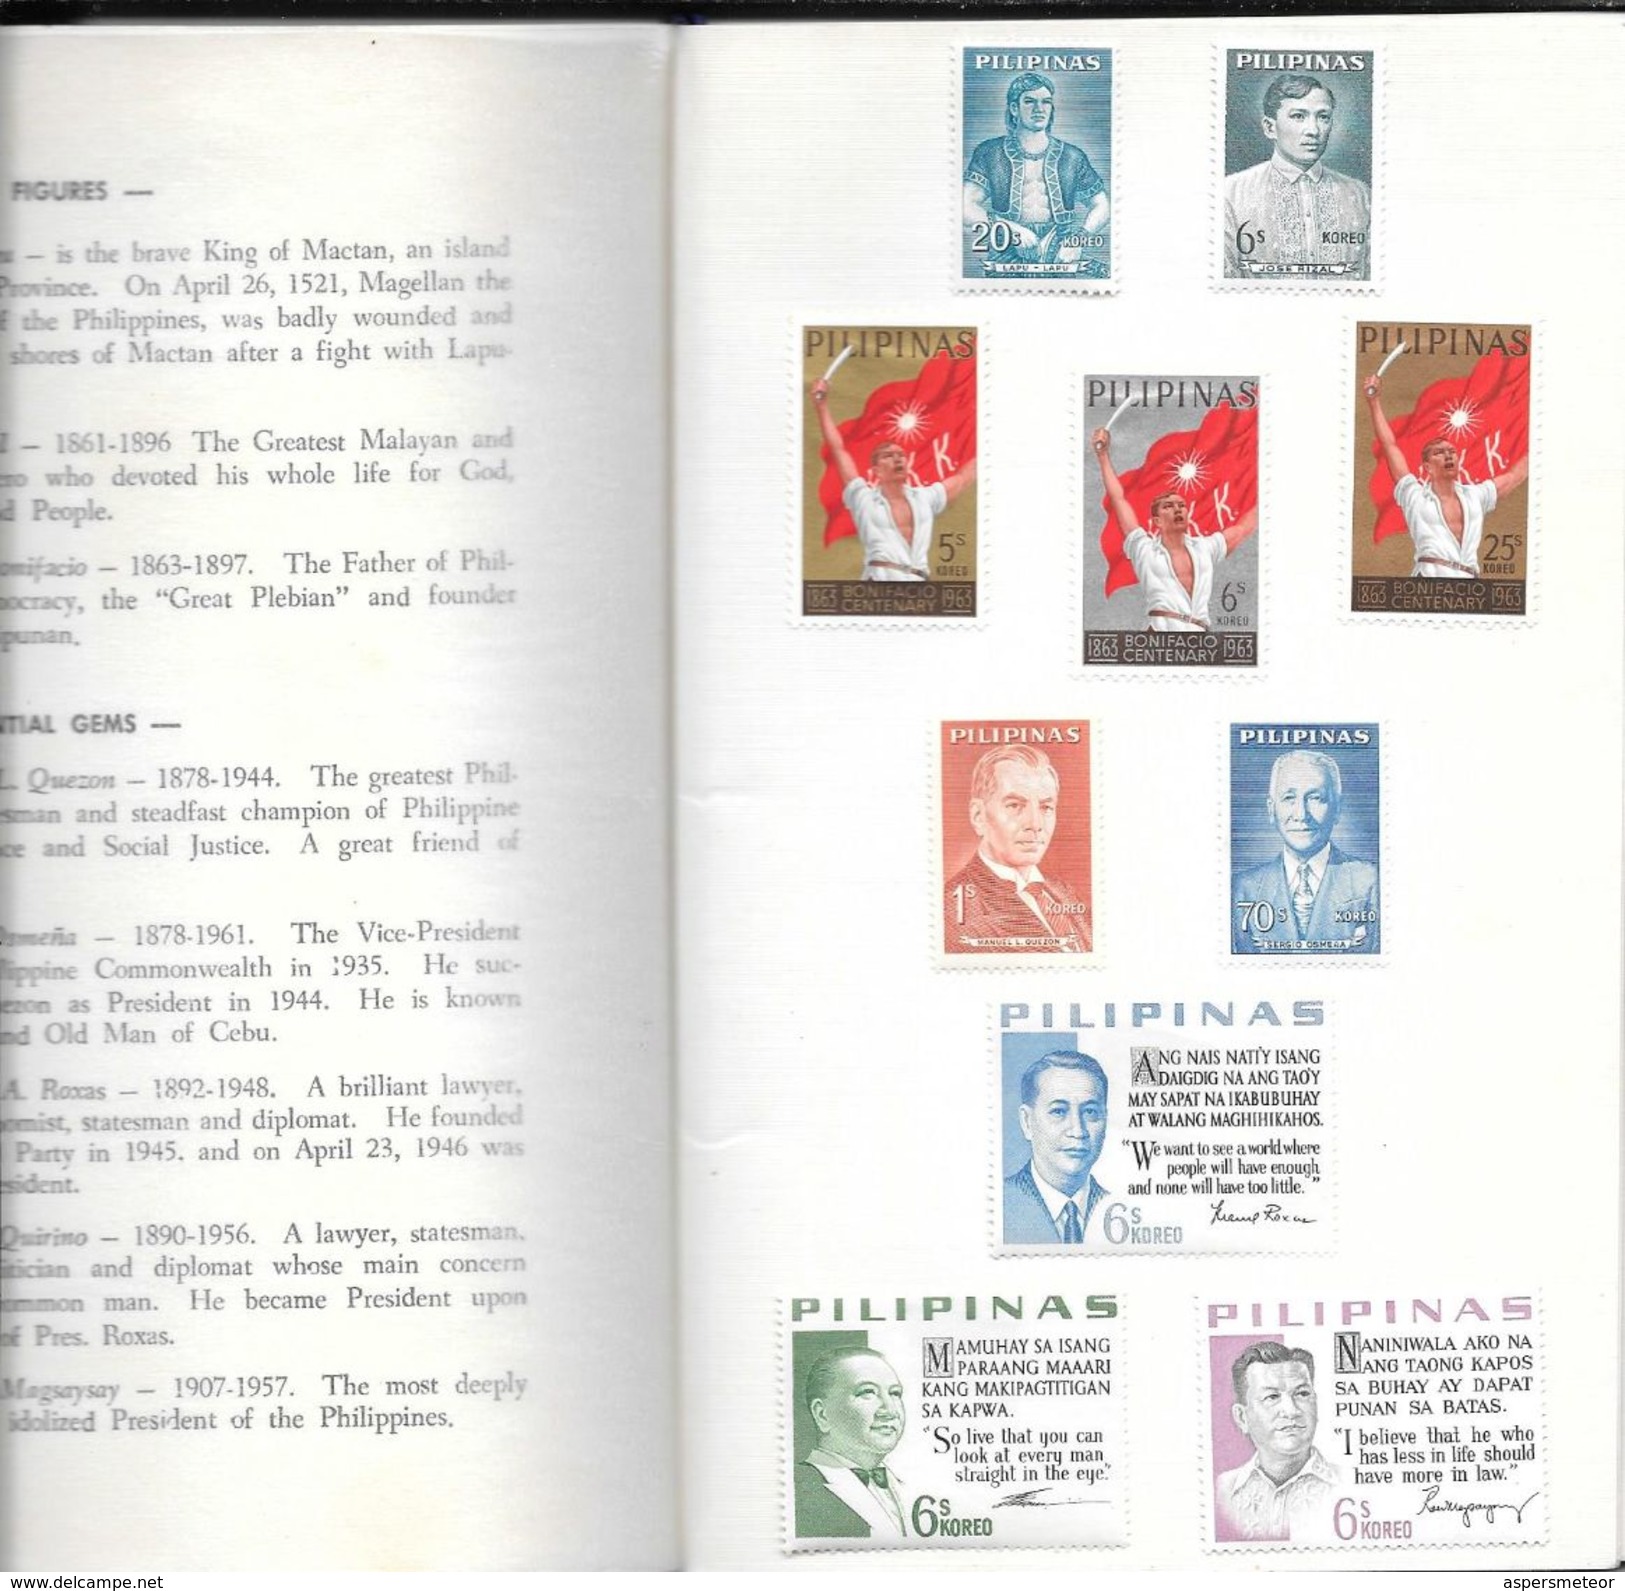 PHILIPPINE COMMEMORATIVE STAMPS 1965 ITU PLENIPOTENTIARY CONFERENCE MONTREUX SWITZERLAND WITH THE COMPLIMENTS OF A. - Filippijnen